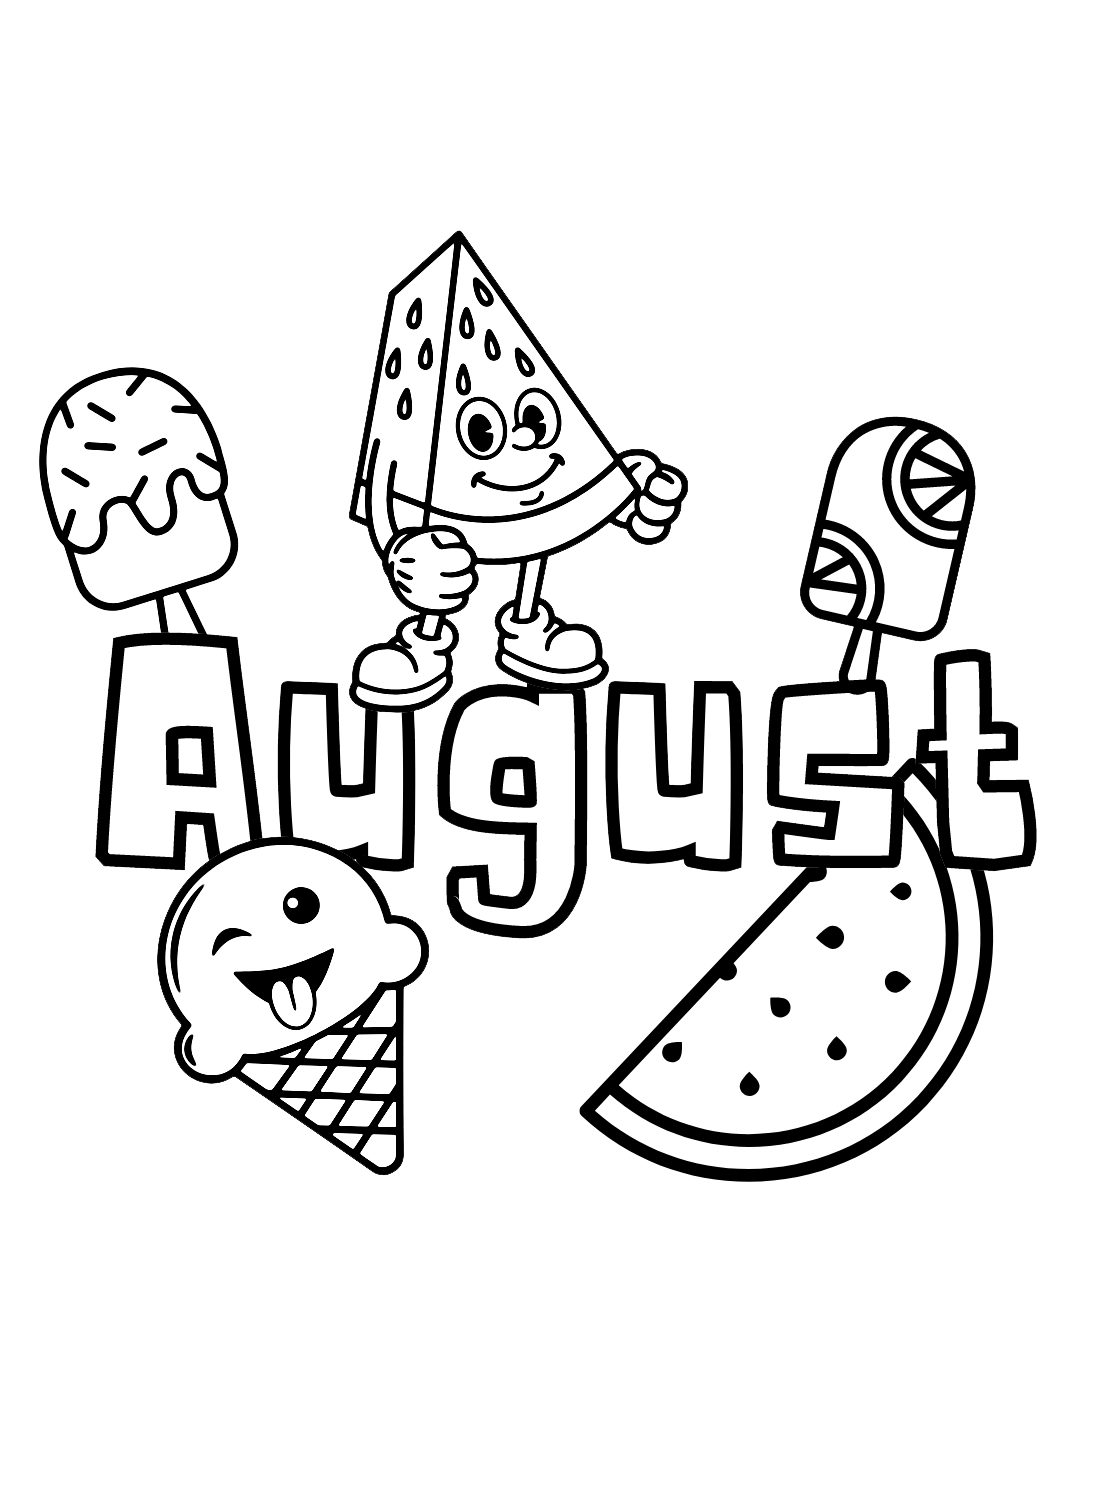 August Summer Coloring Pages